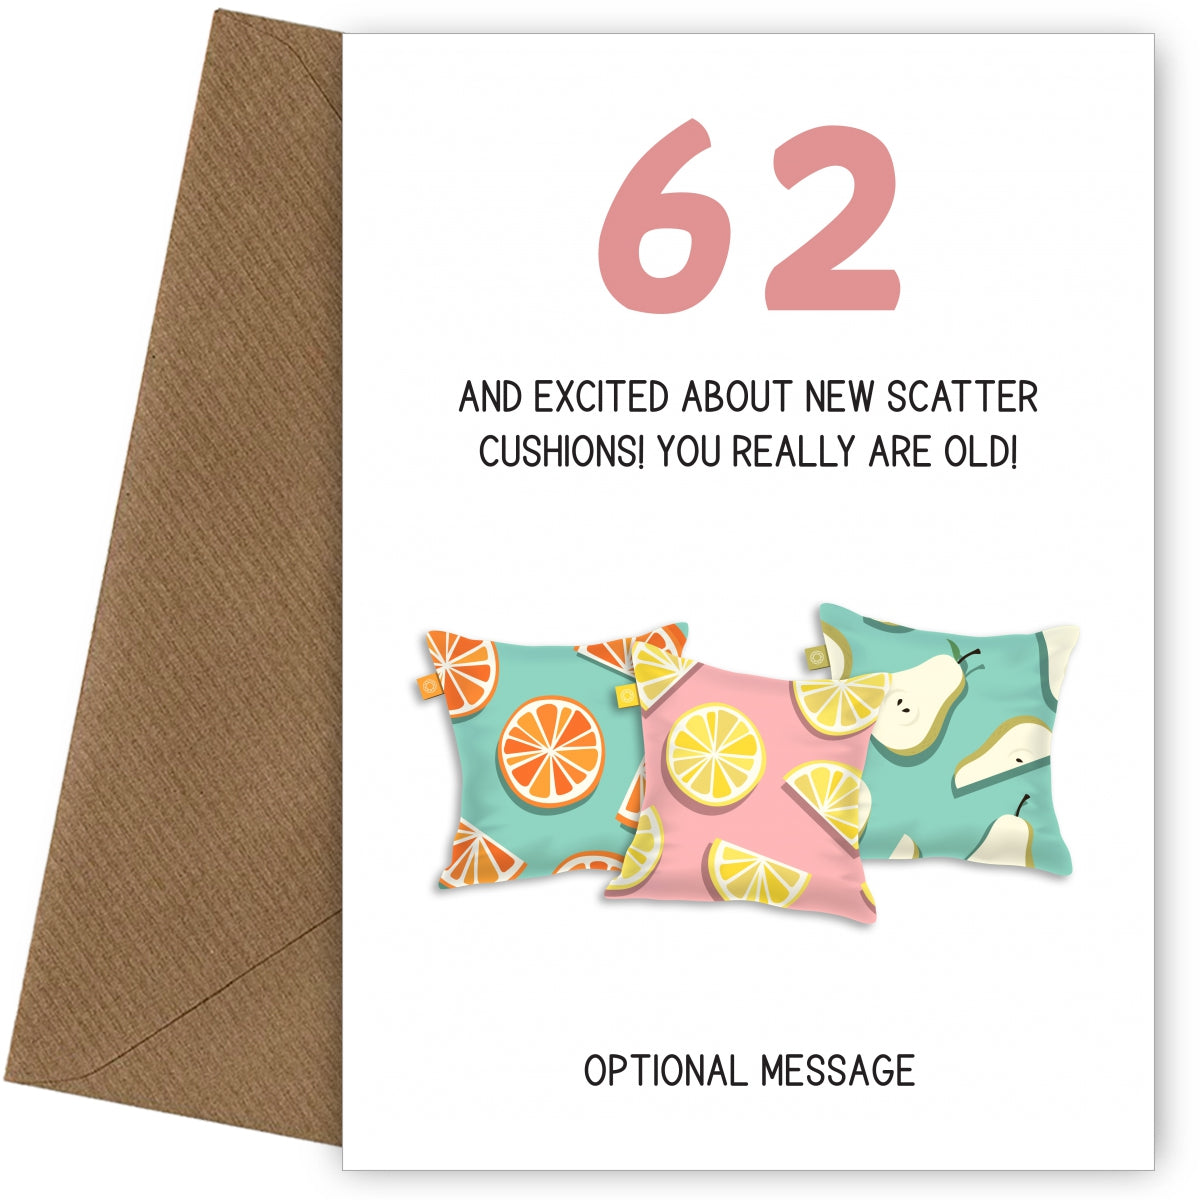 Happy 62nd Birthday Card - Excited About Scatter Cushions!